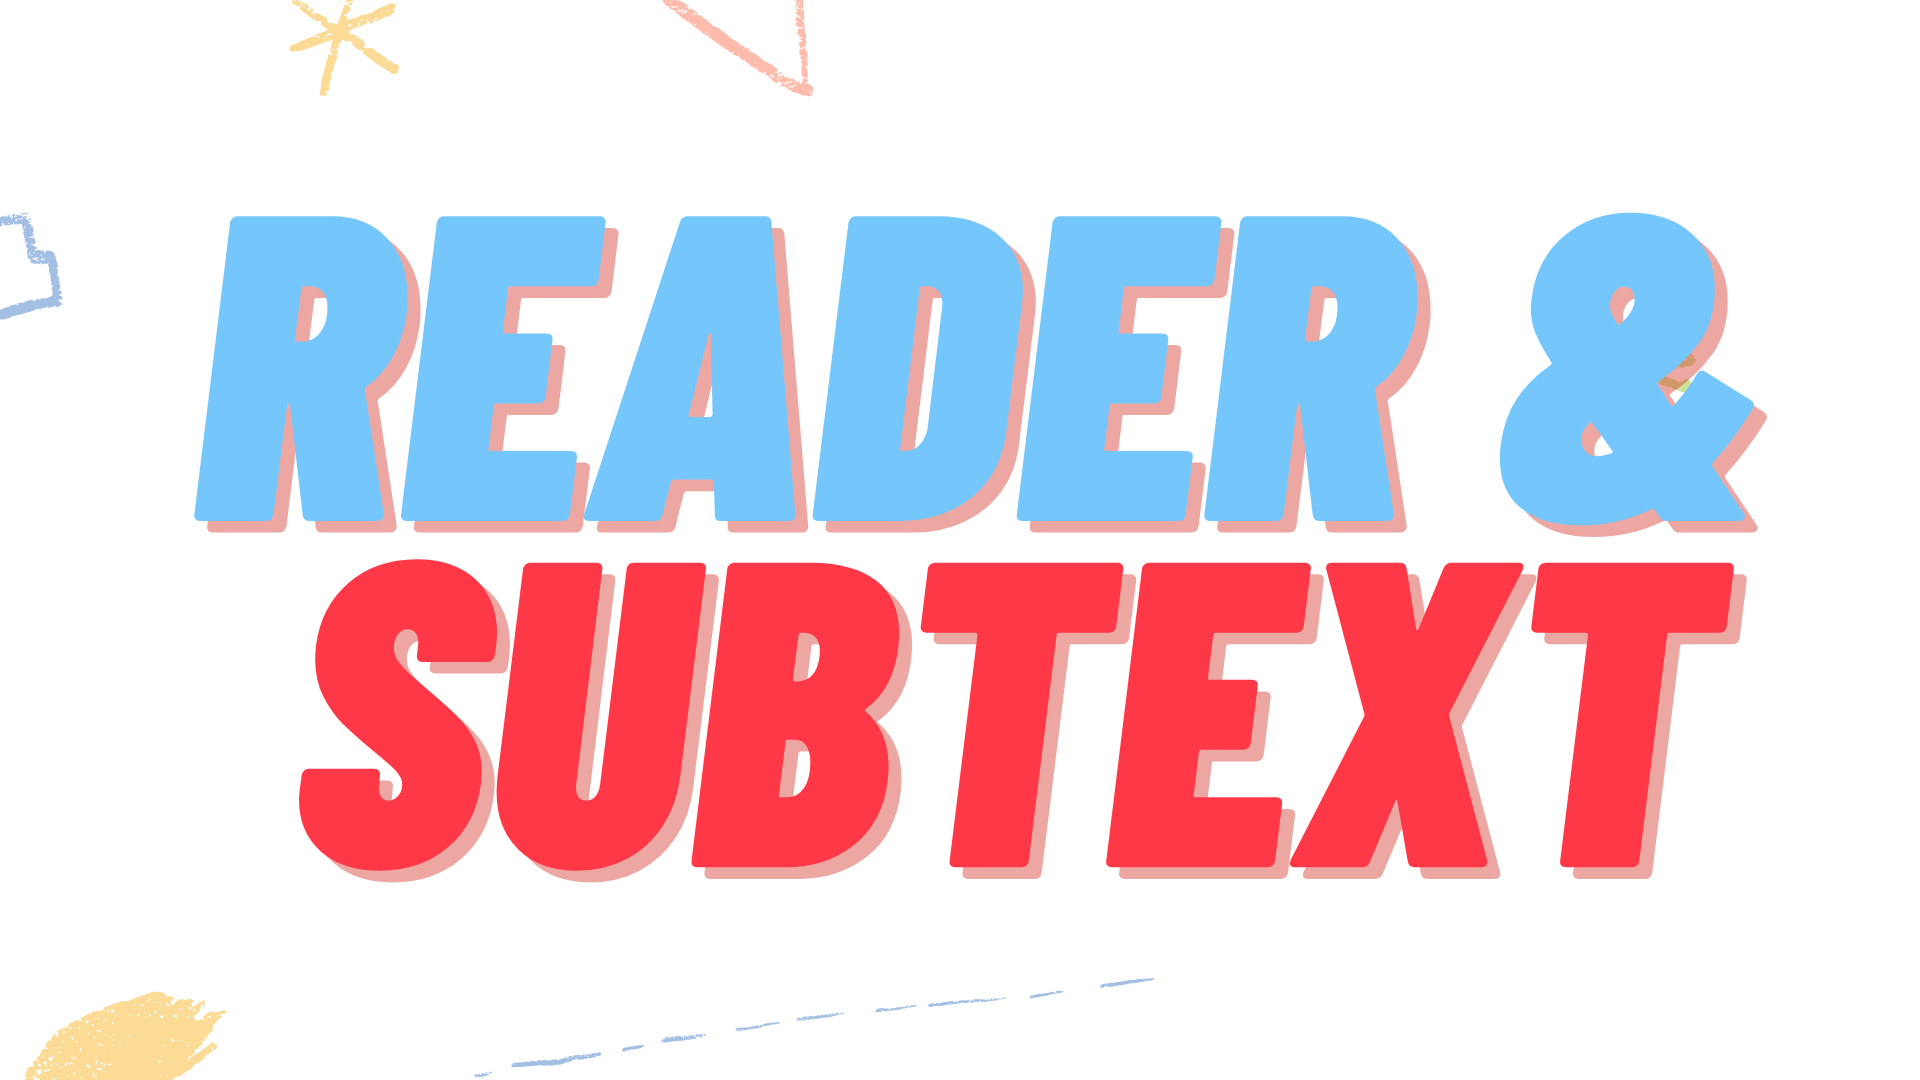 The words Readers and Subtext in blue and red on a white background illustrating how subtext engages readers.